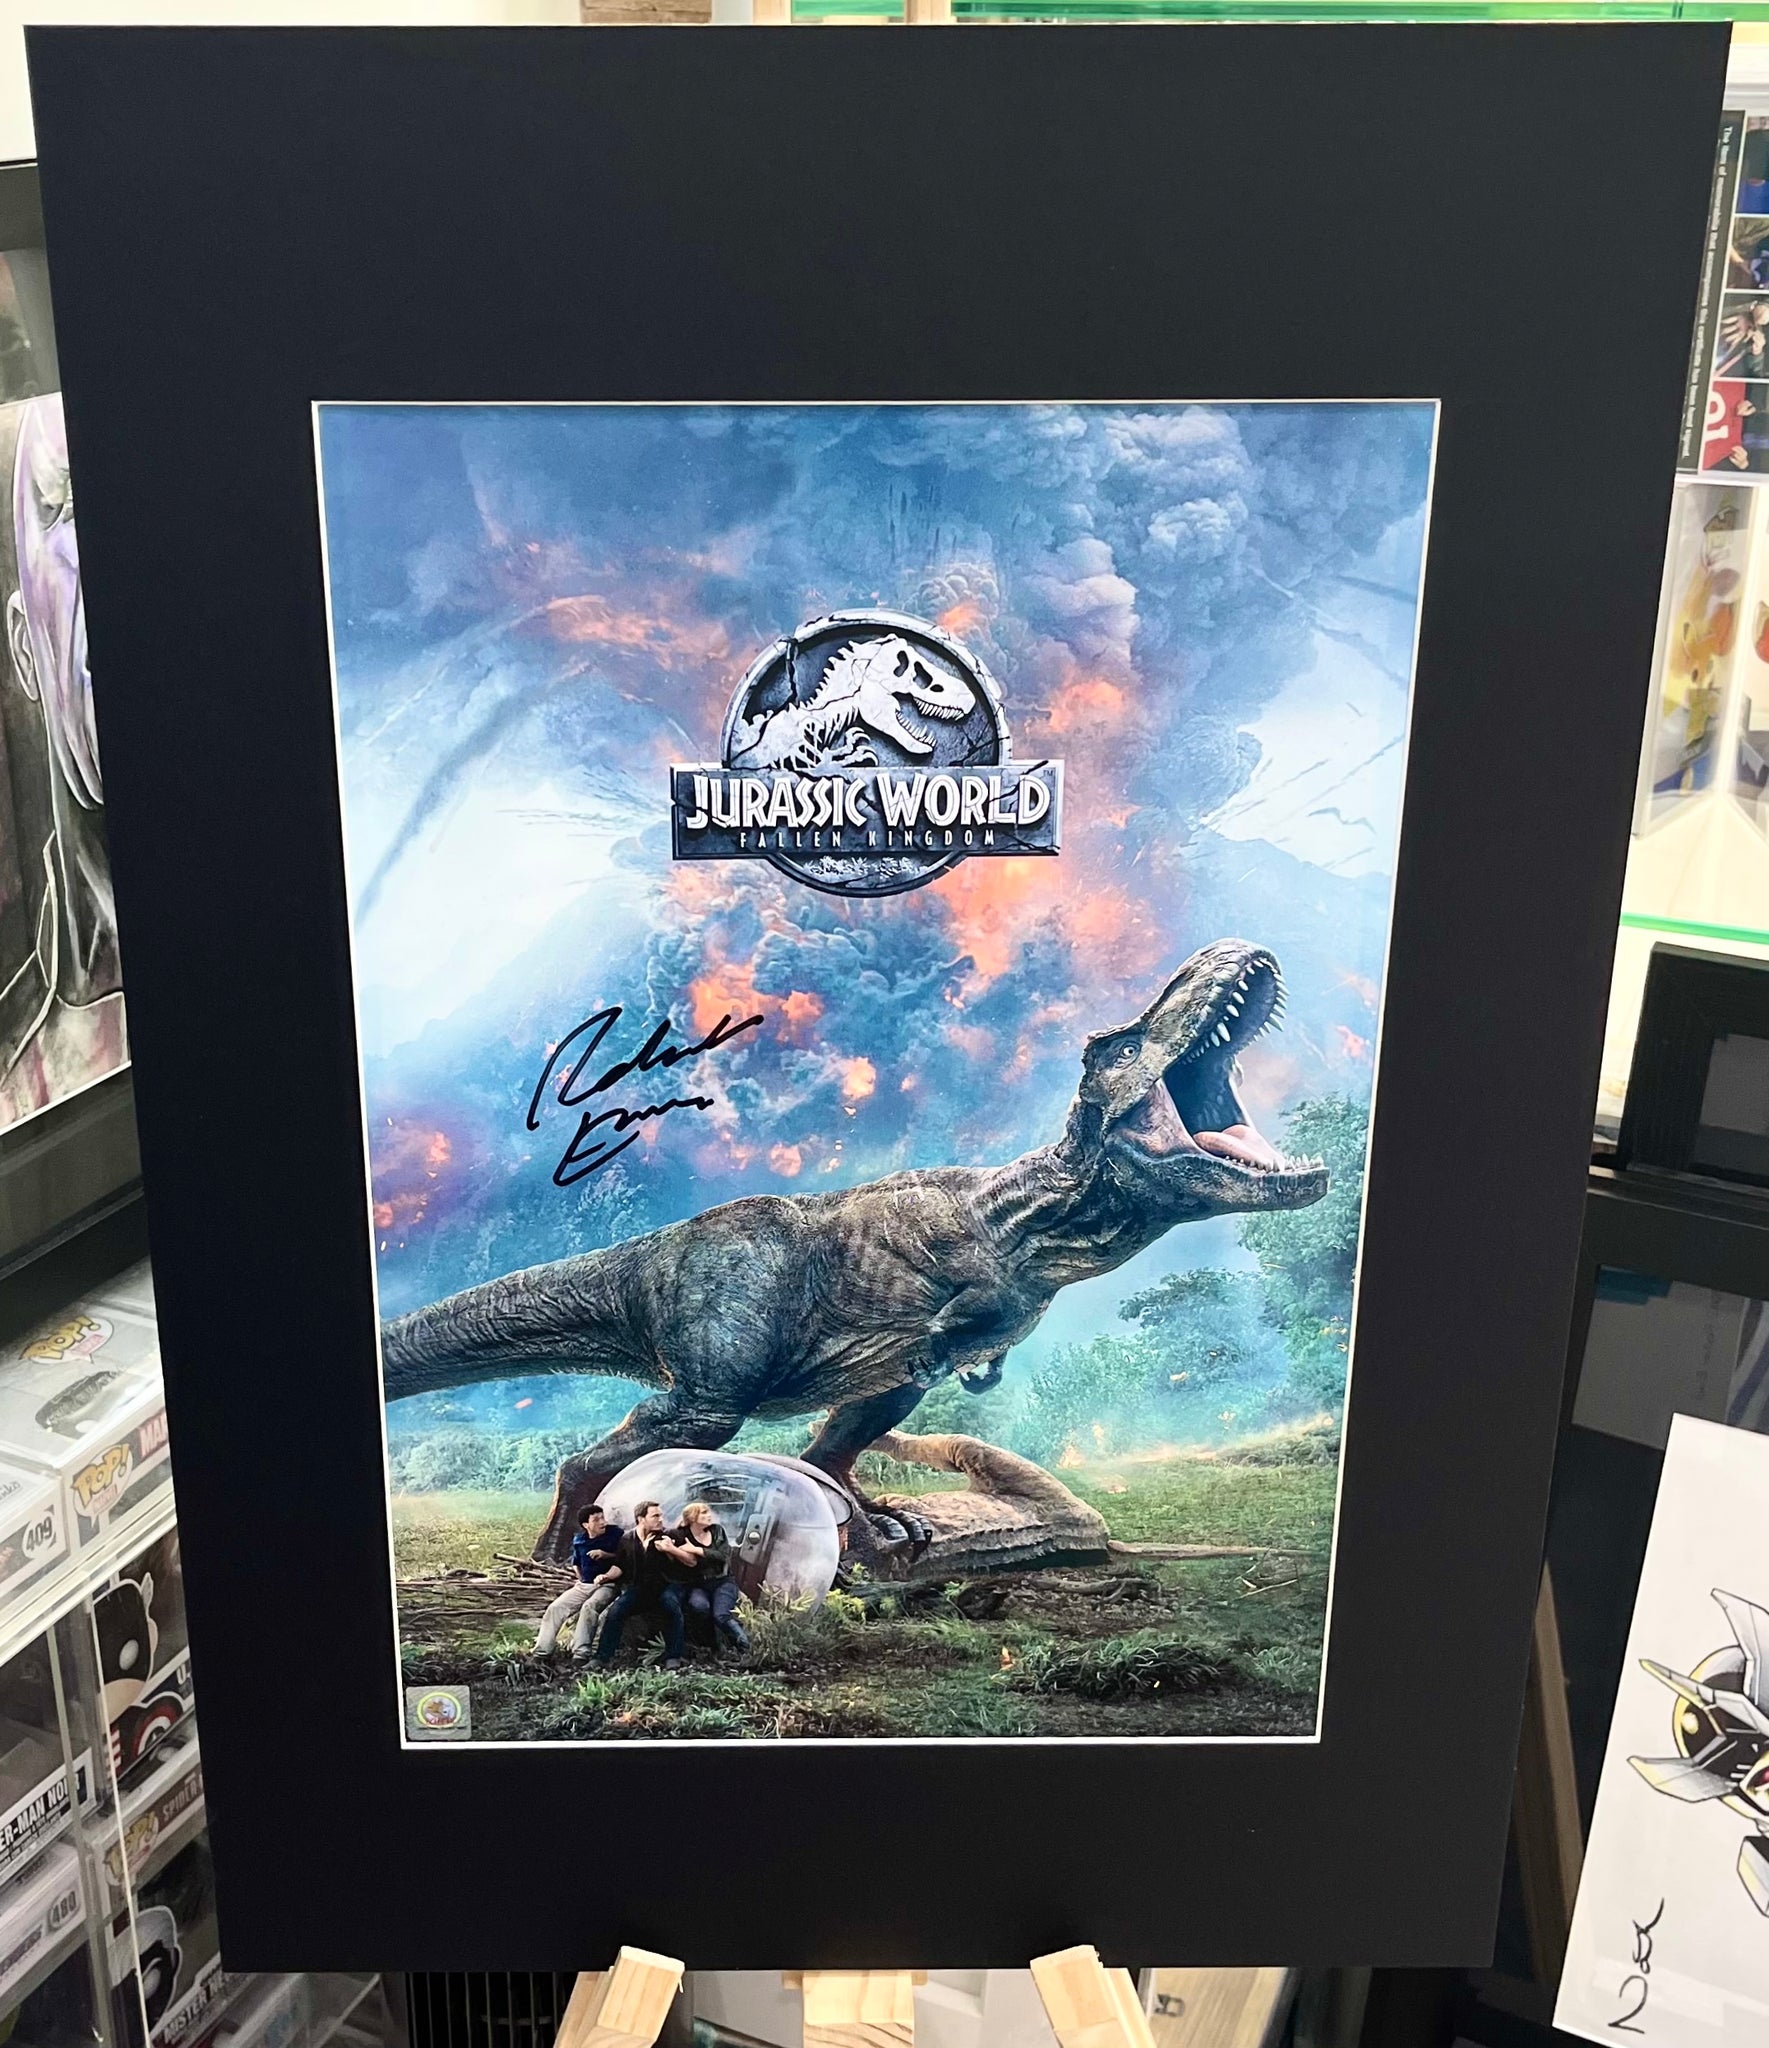 Jurassic World: Fallen Kingdom Robert Emms Autographed Film Poster with Triple Layer Authenticity